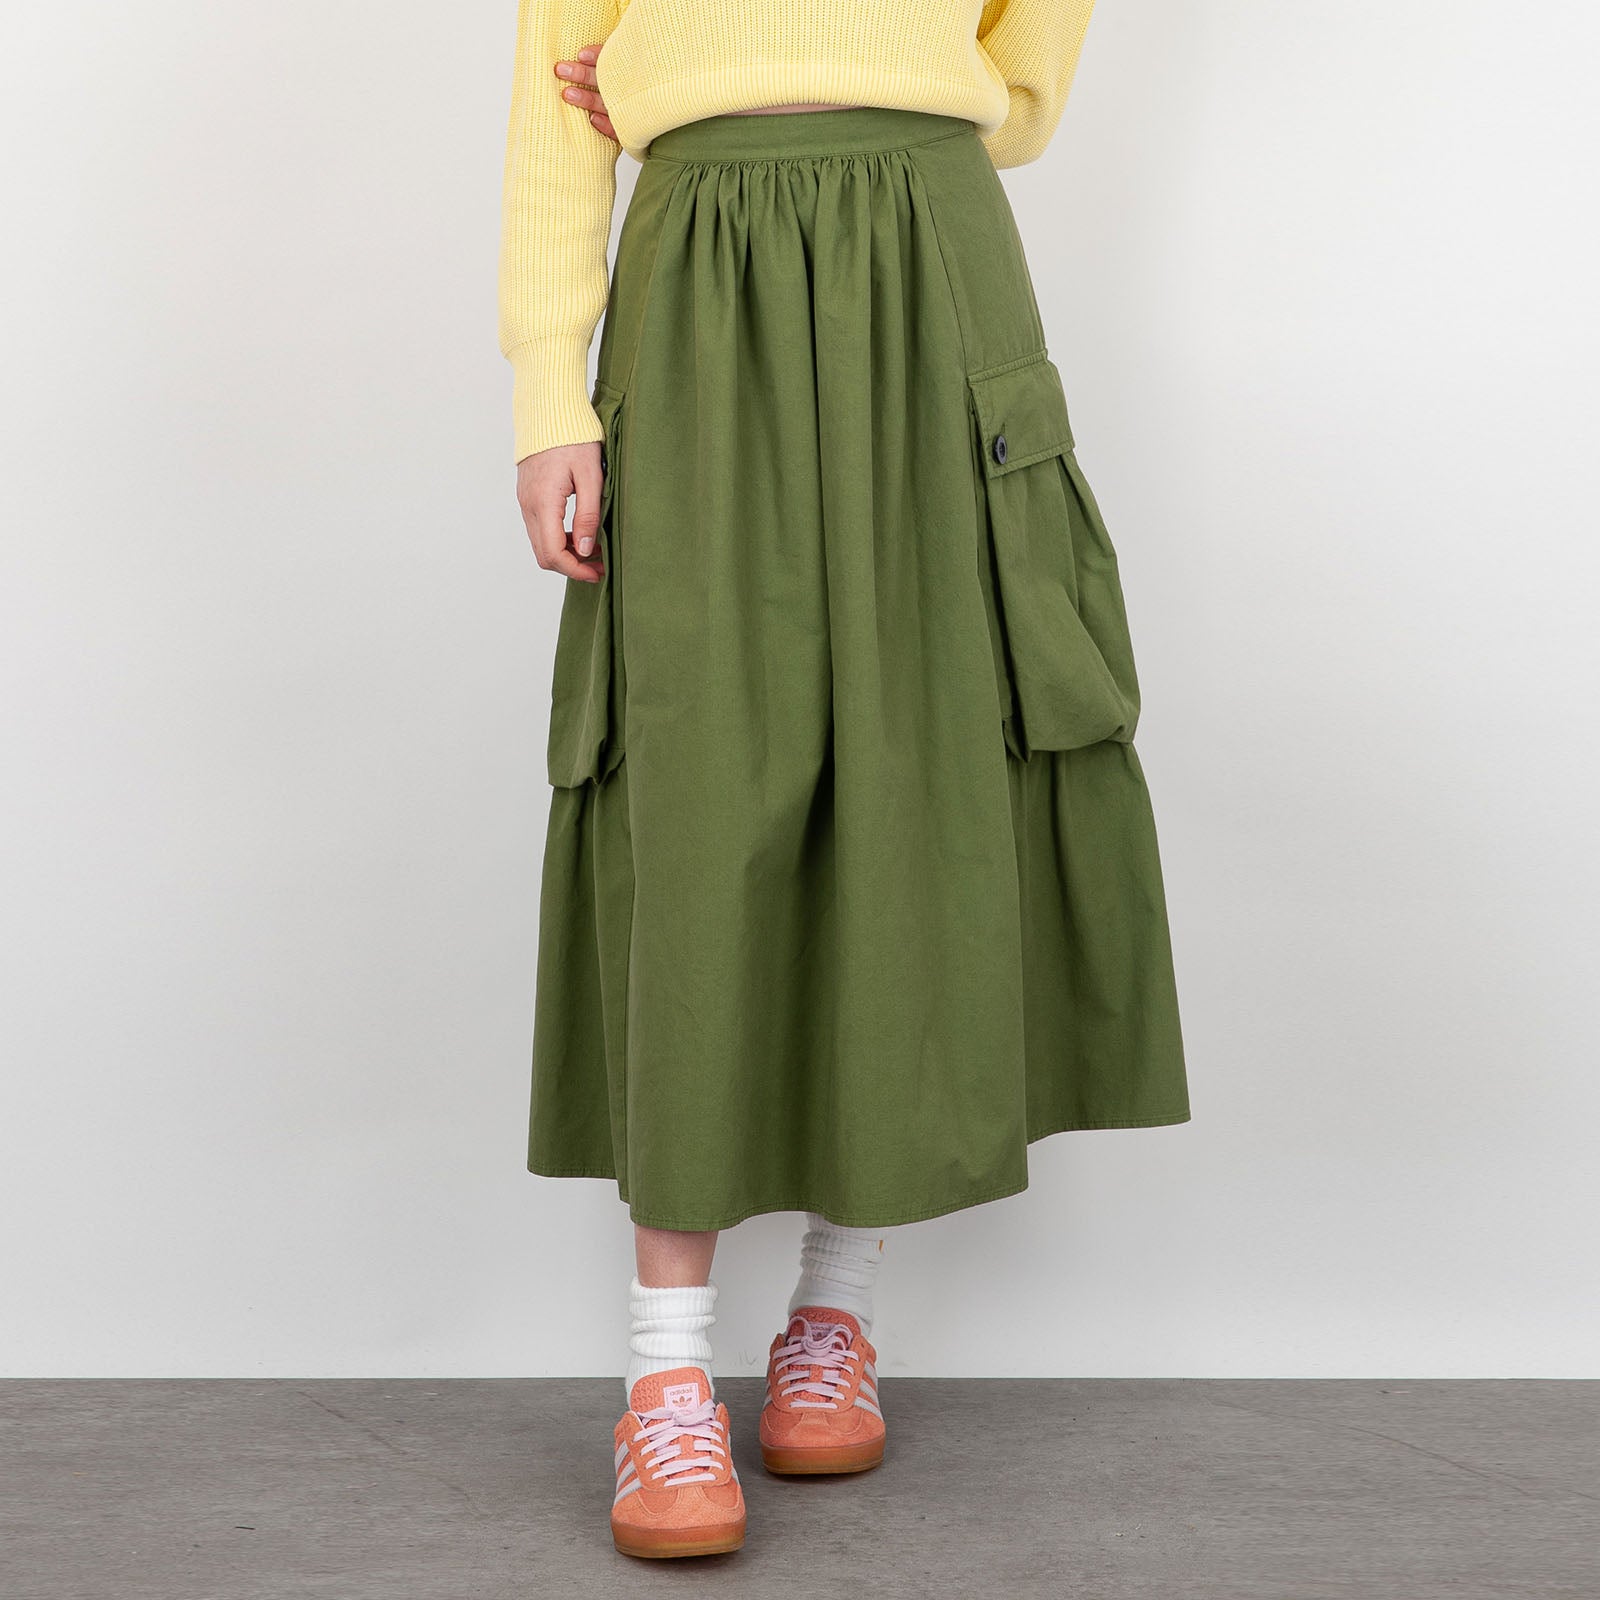 Department Five Selma Skirt in Military Green Cotton - 7